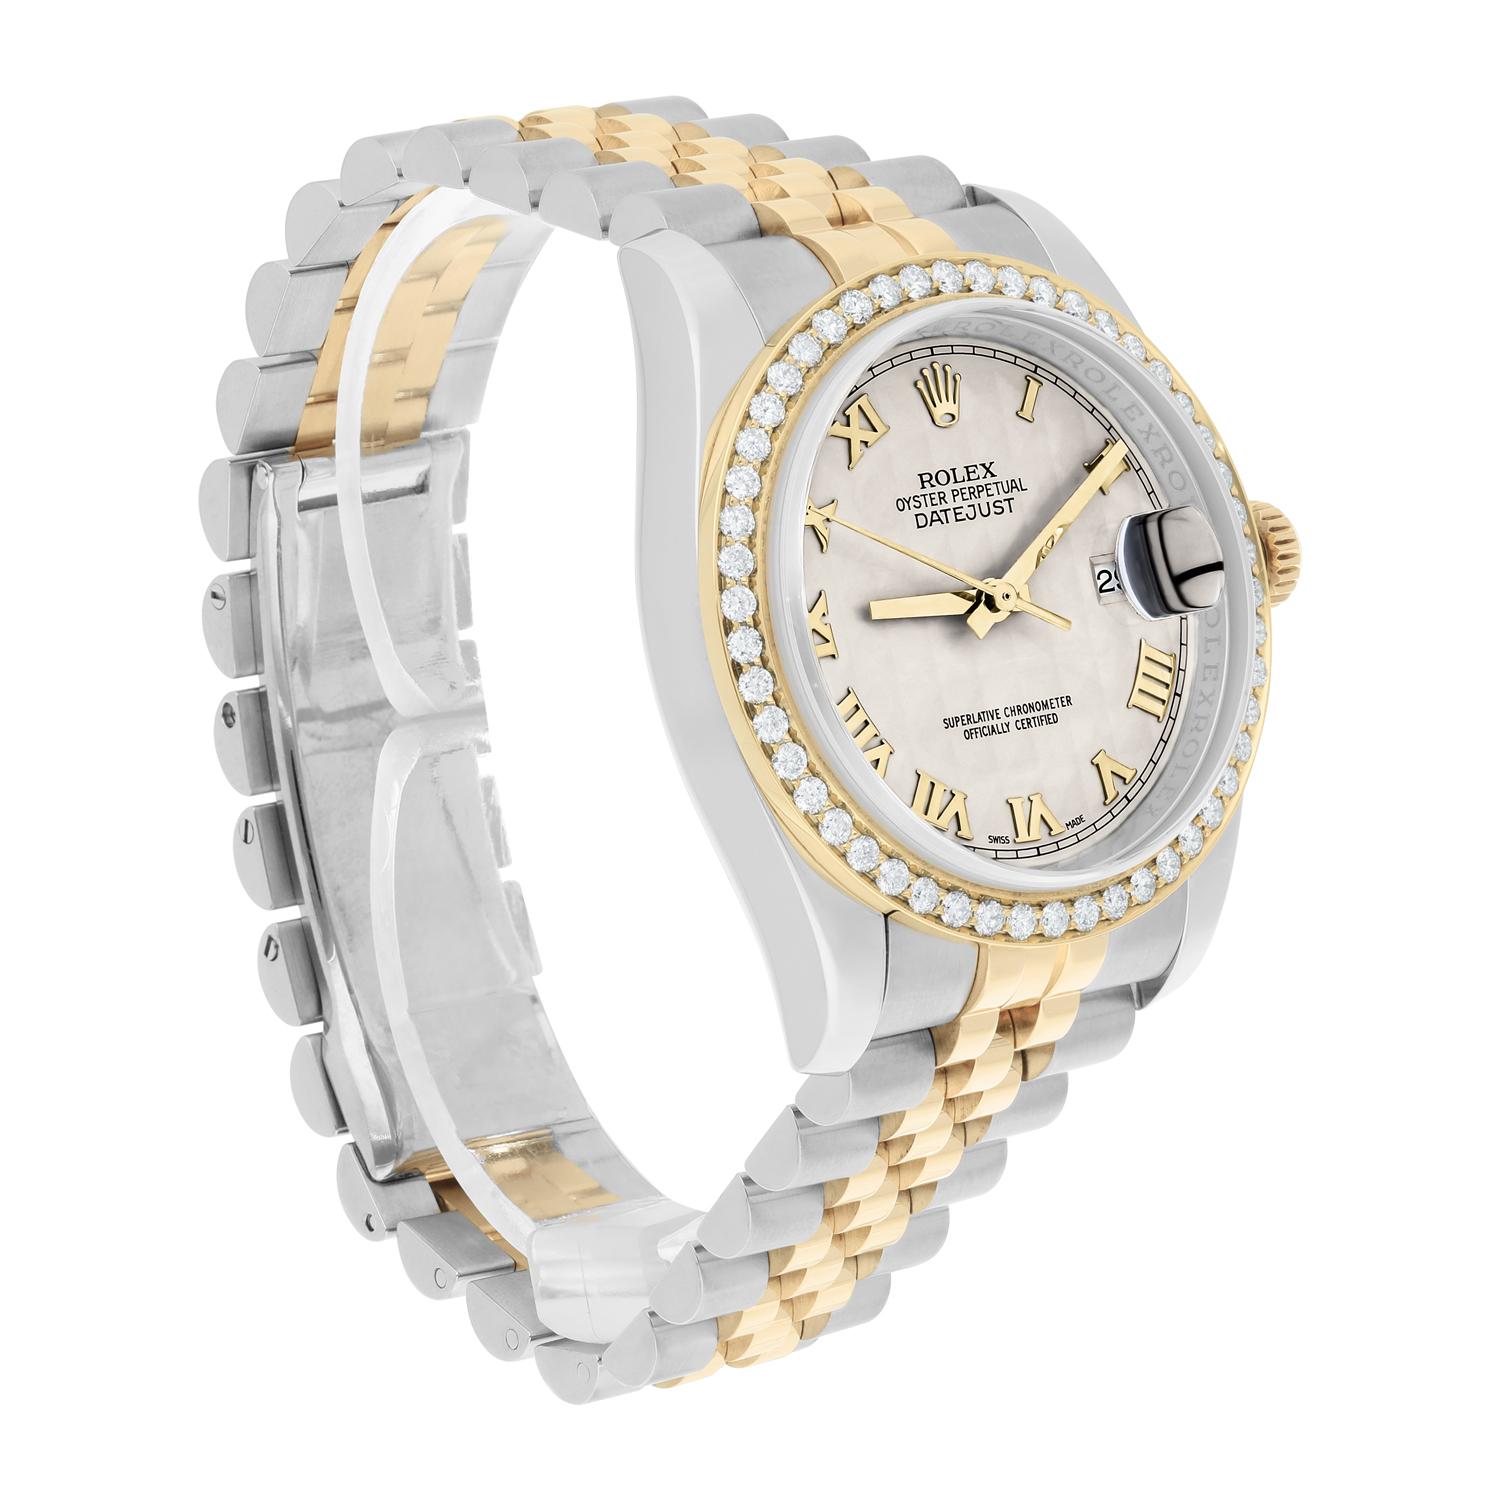 Rolex Datejust 36 Diamond Gold and Steel 116233 Ivory Pyramid Dial Jubilee Watch For Sale 2